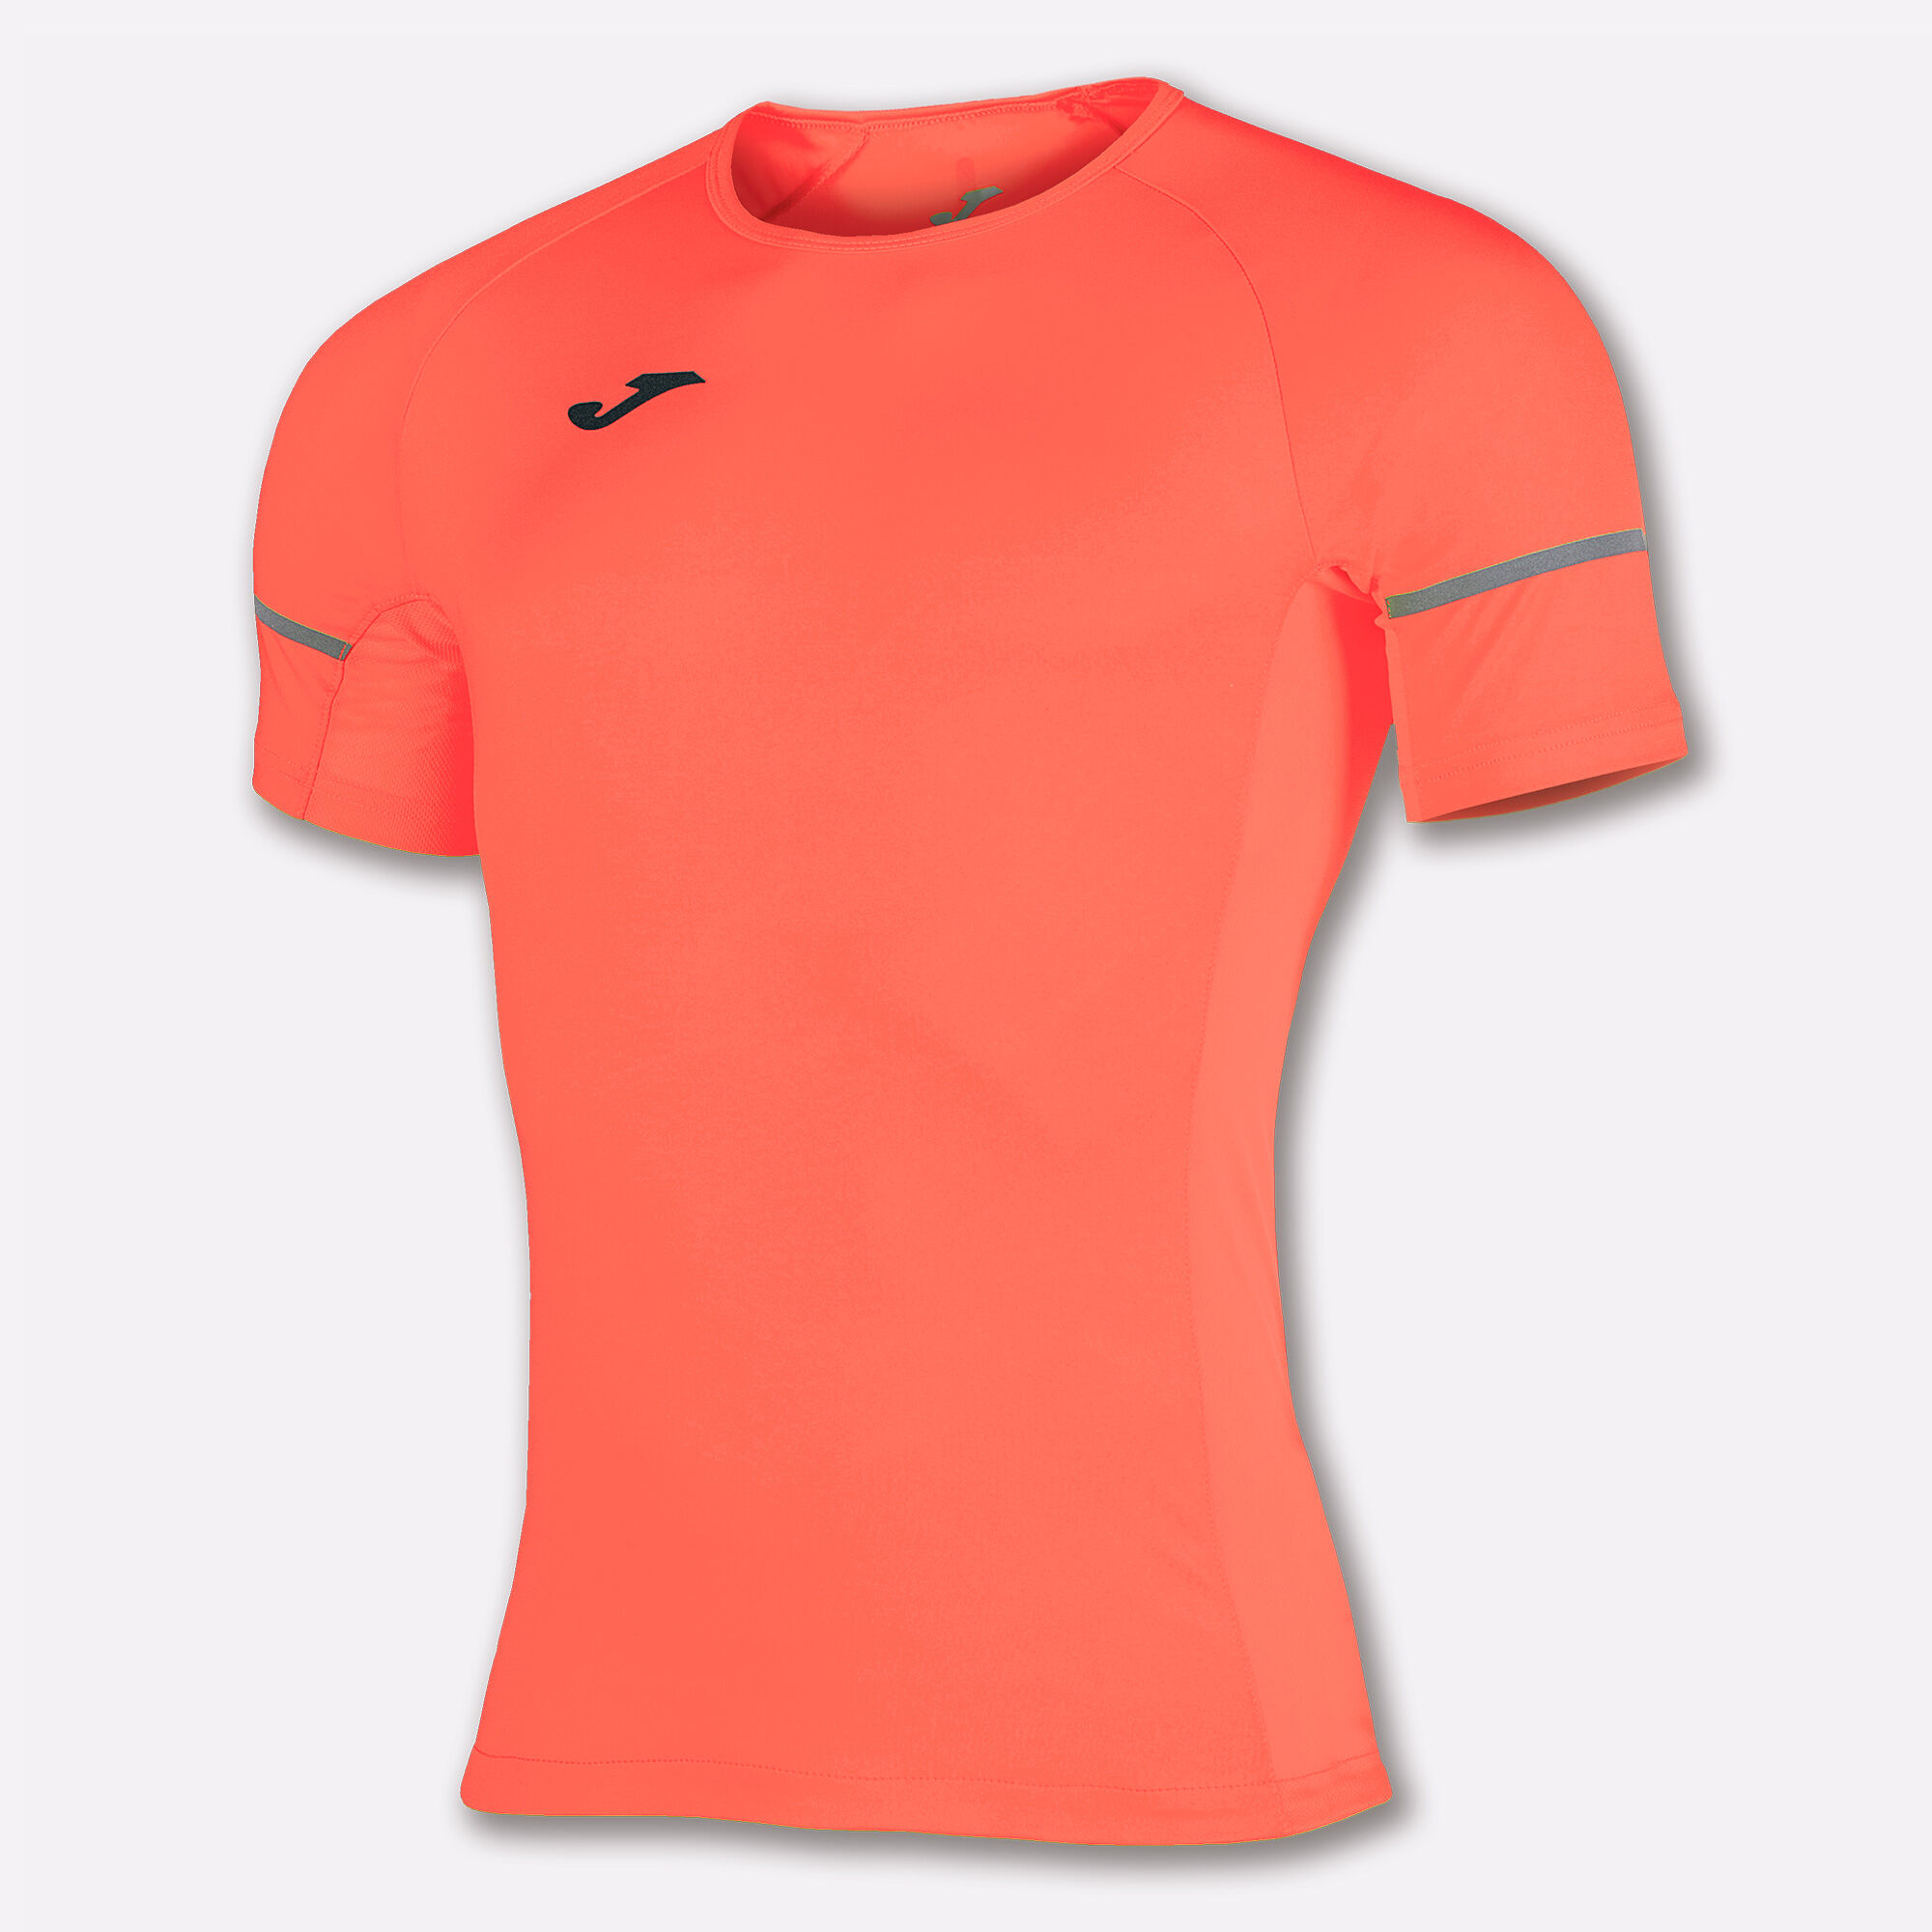 MAILLOT MANCHES COURTES HOMME RACE CORAIL FLUO